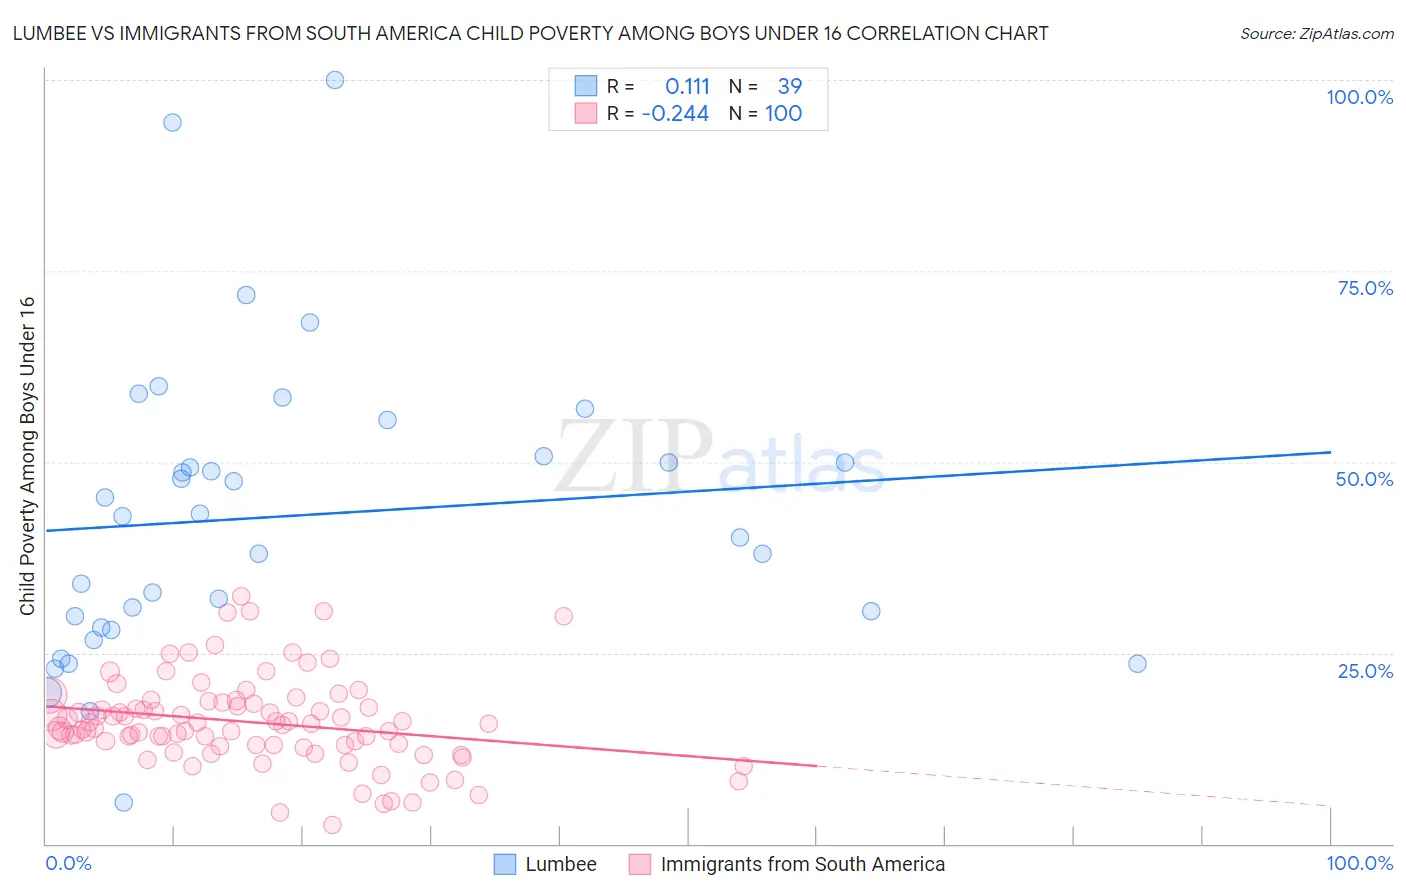 Lumbee vs Immigrants from South America Child Poverty Among Boys Under 16